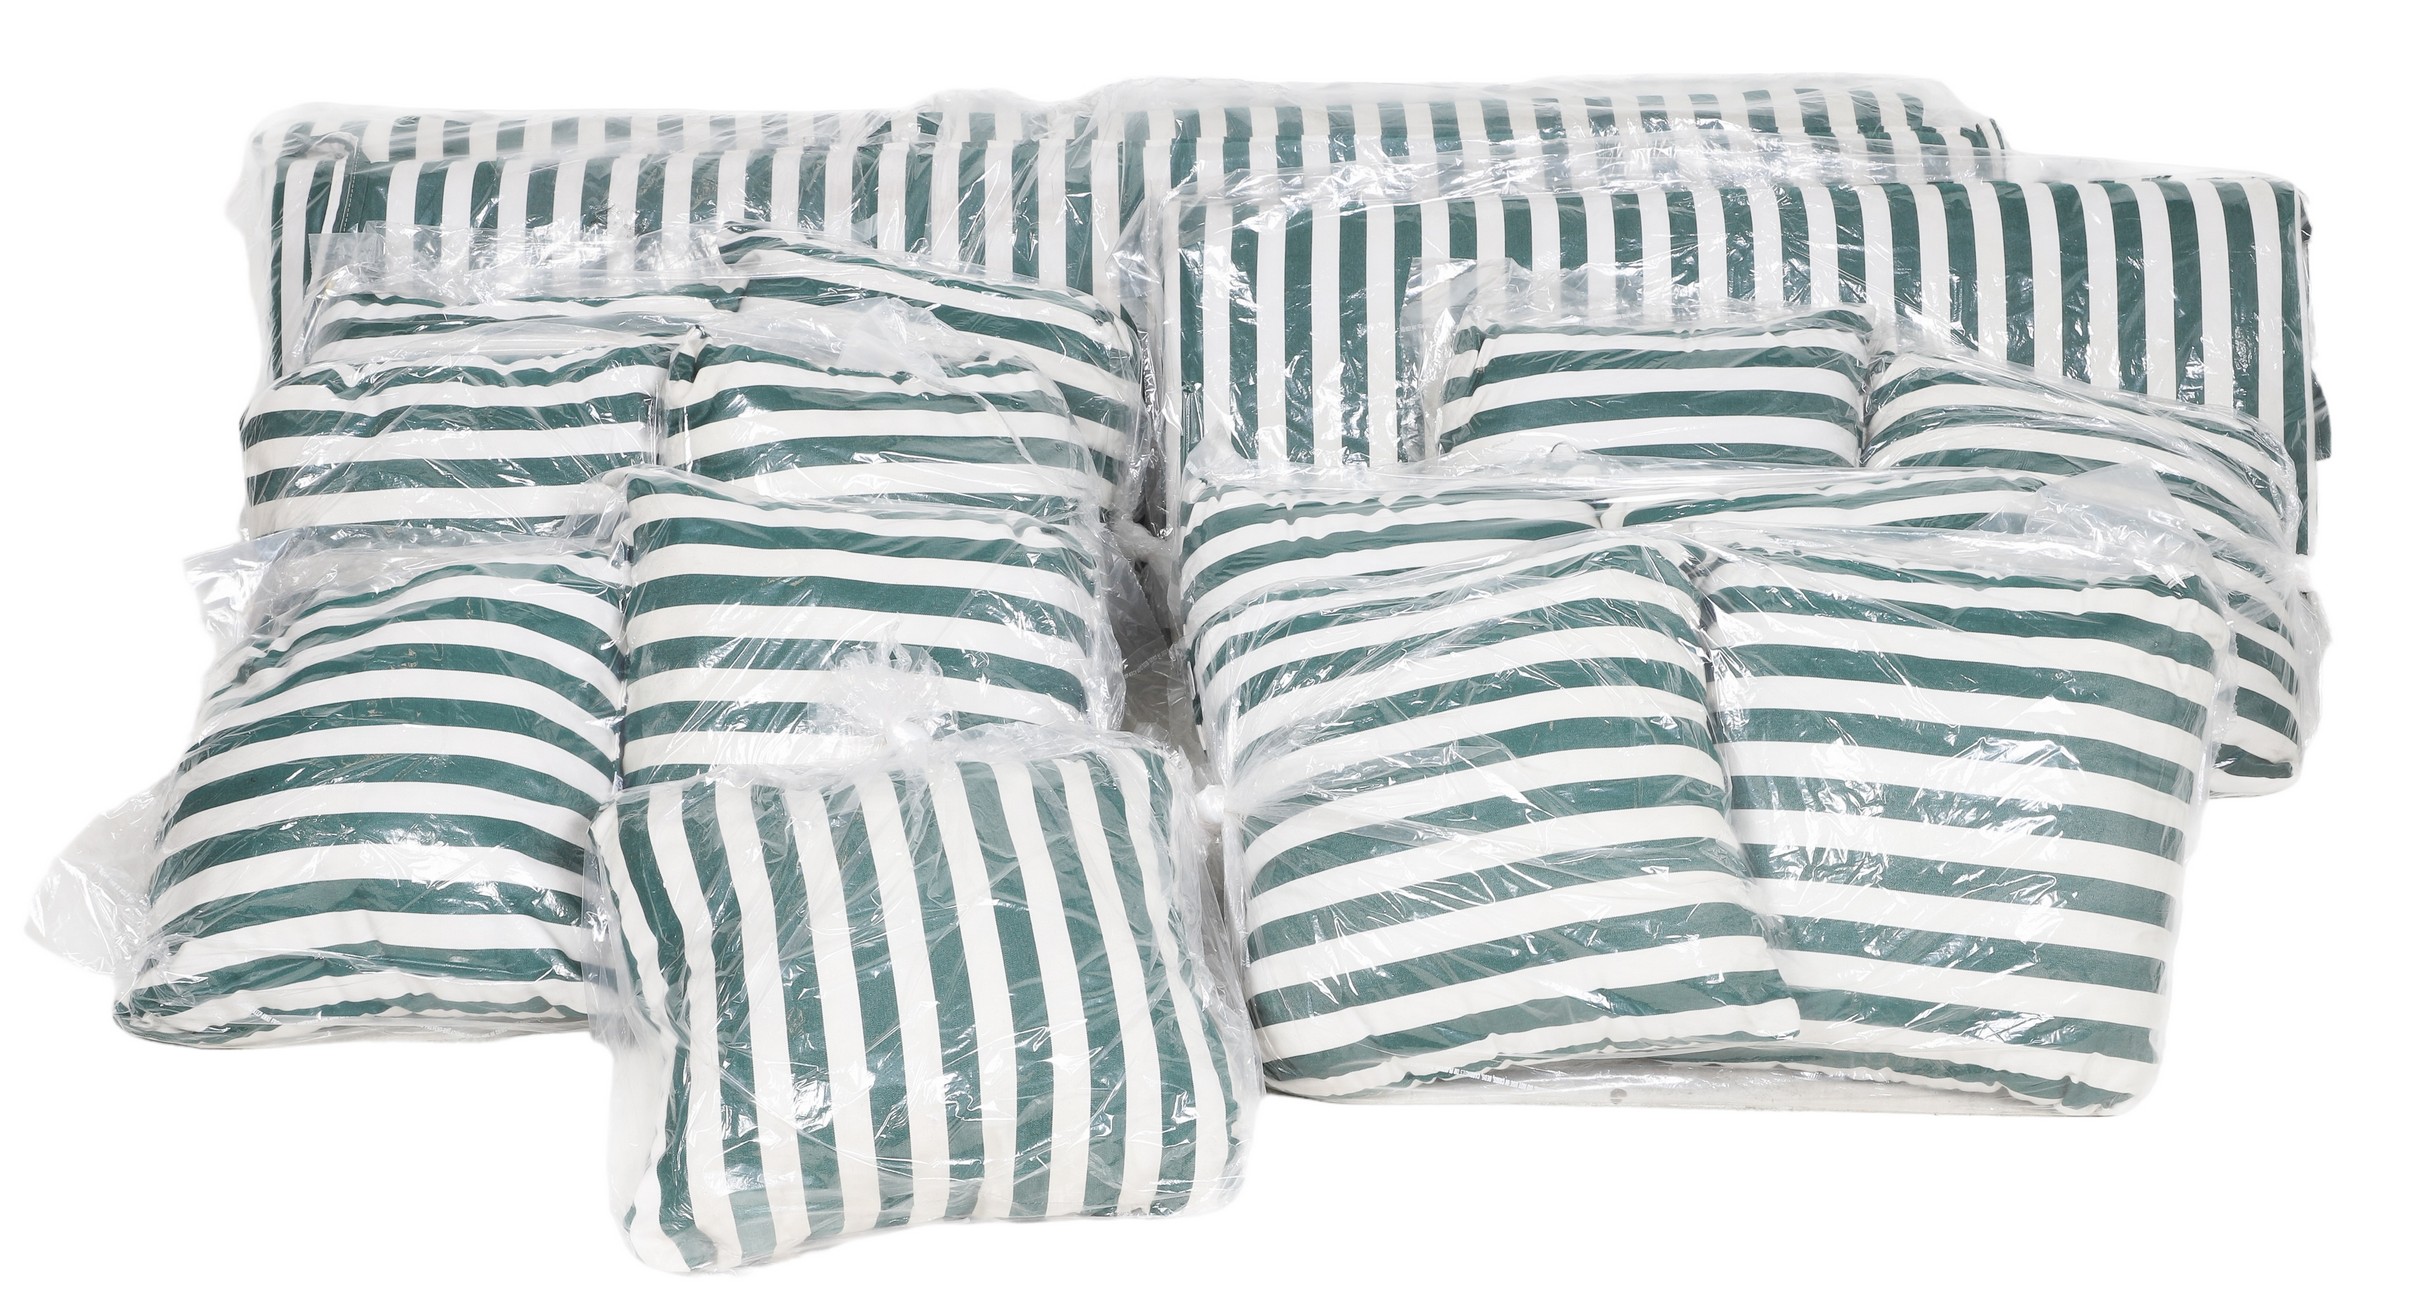 Green and white striped patio furniture